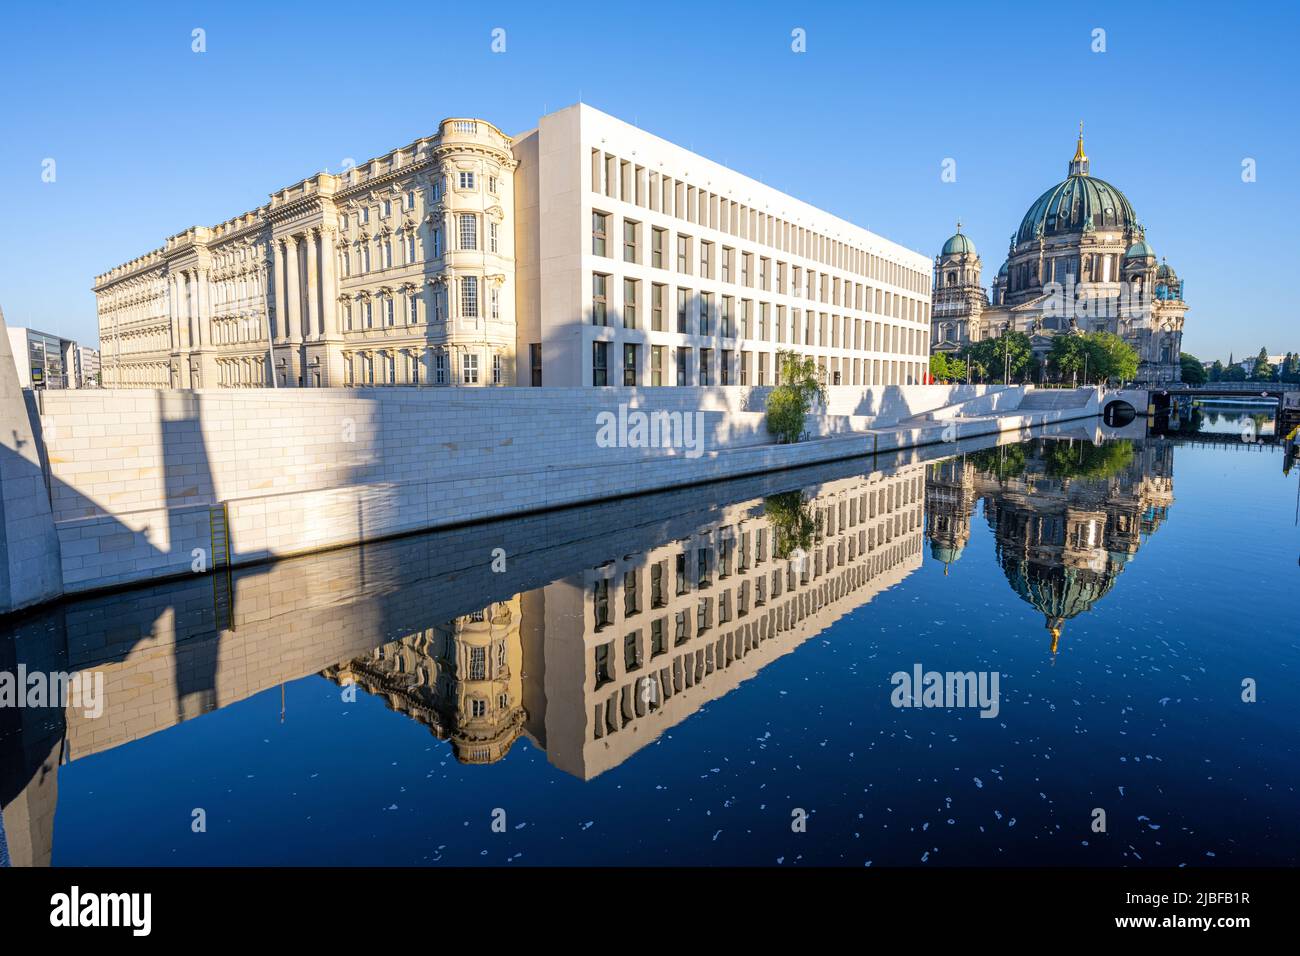 The rebuilt City Palace with the Berliner Dom reflected in the river Spree Stock Photo